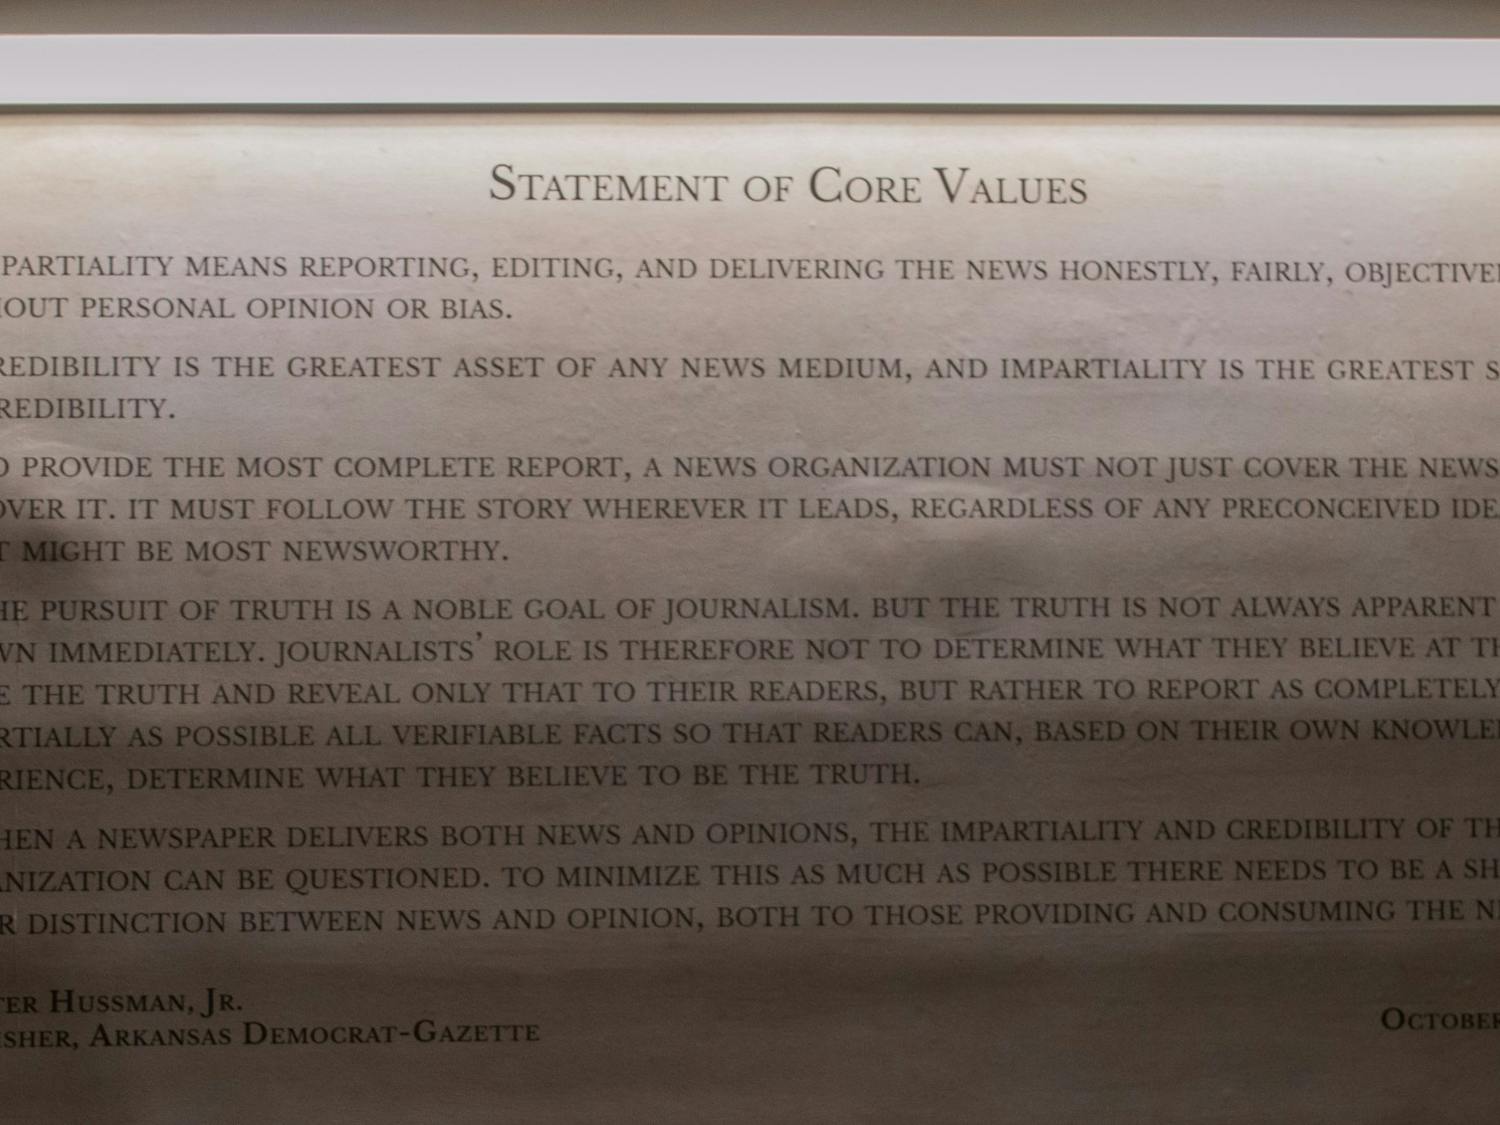 The Statement of Core Values, created by Walter Hussman Jr., publisher of the Arkansas Democrat-Gazette, is in Carroll Hall.